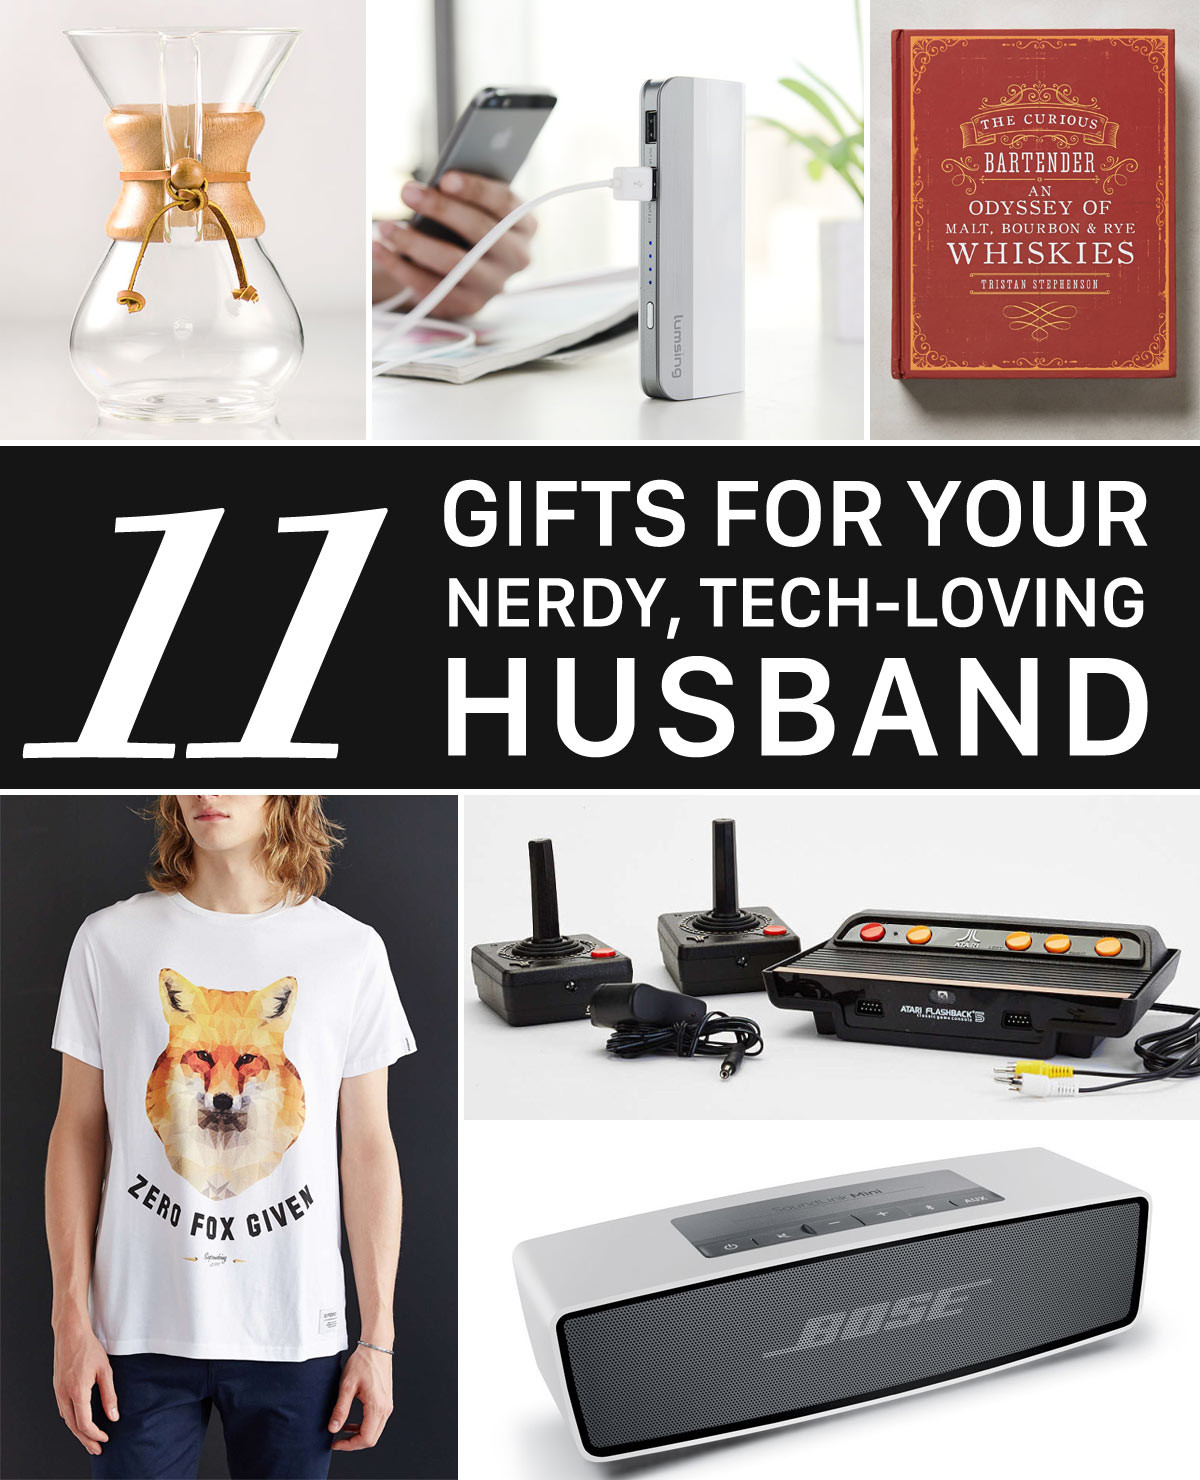 Nerd Gift Ideas For Boyfriend
 Holiday Gift Guide 2 For Your Nerdy Tech Loving Husband